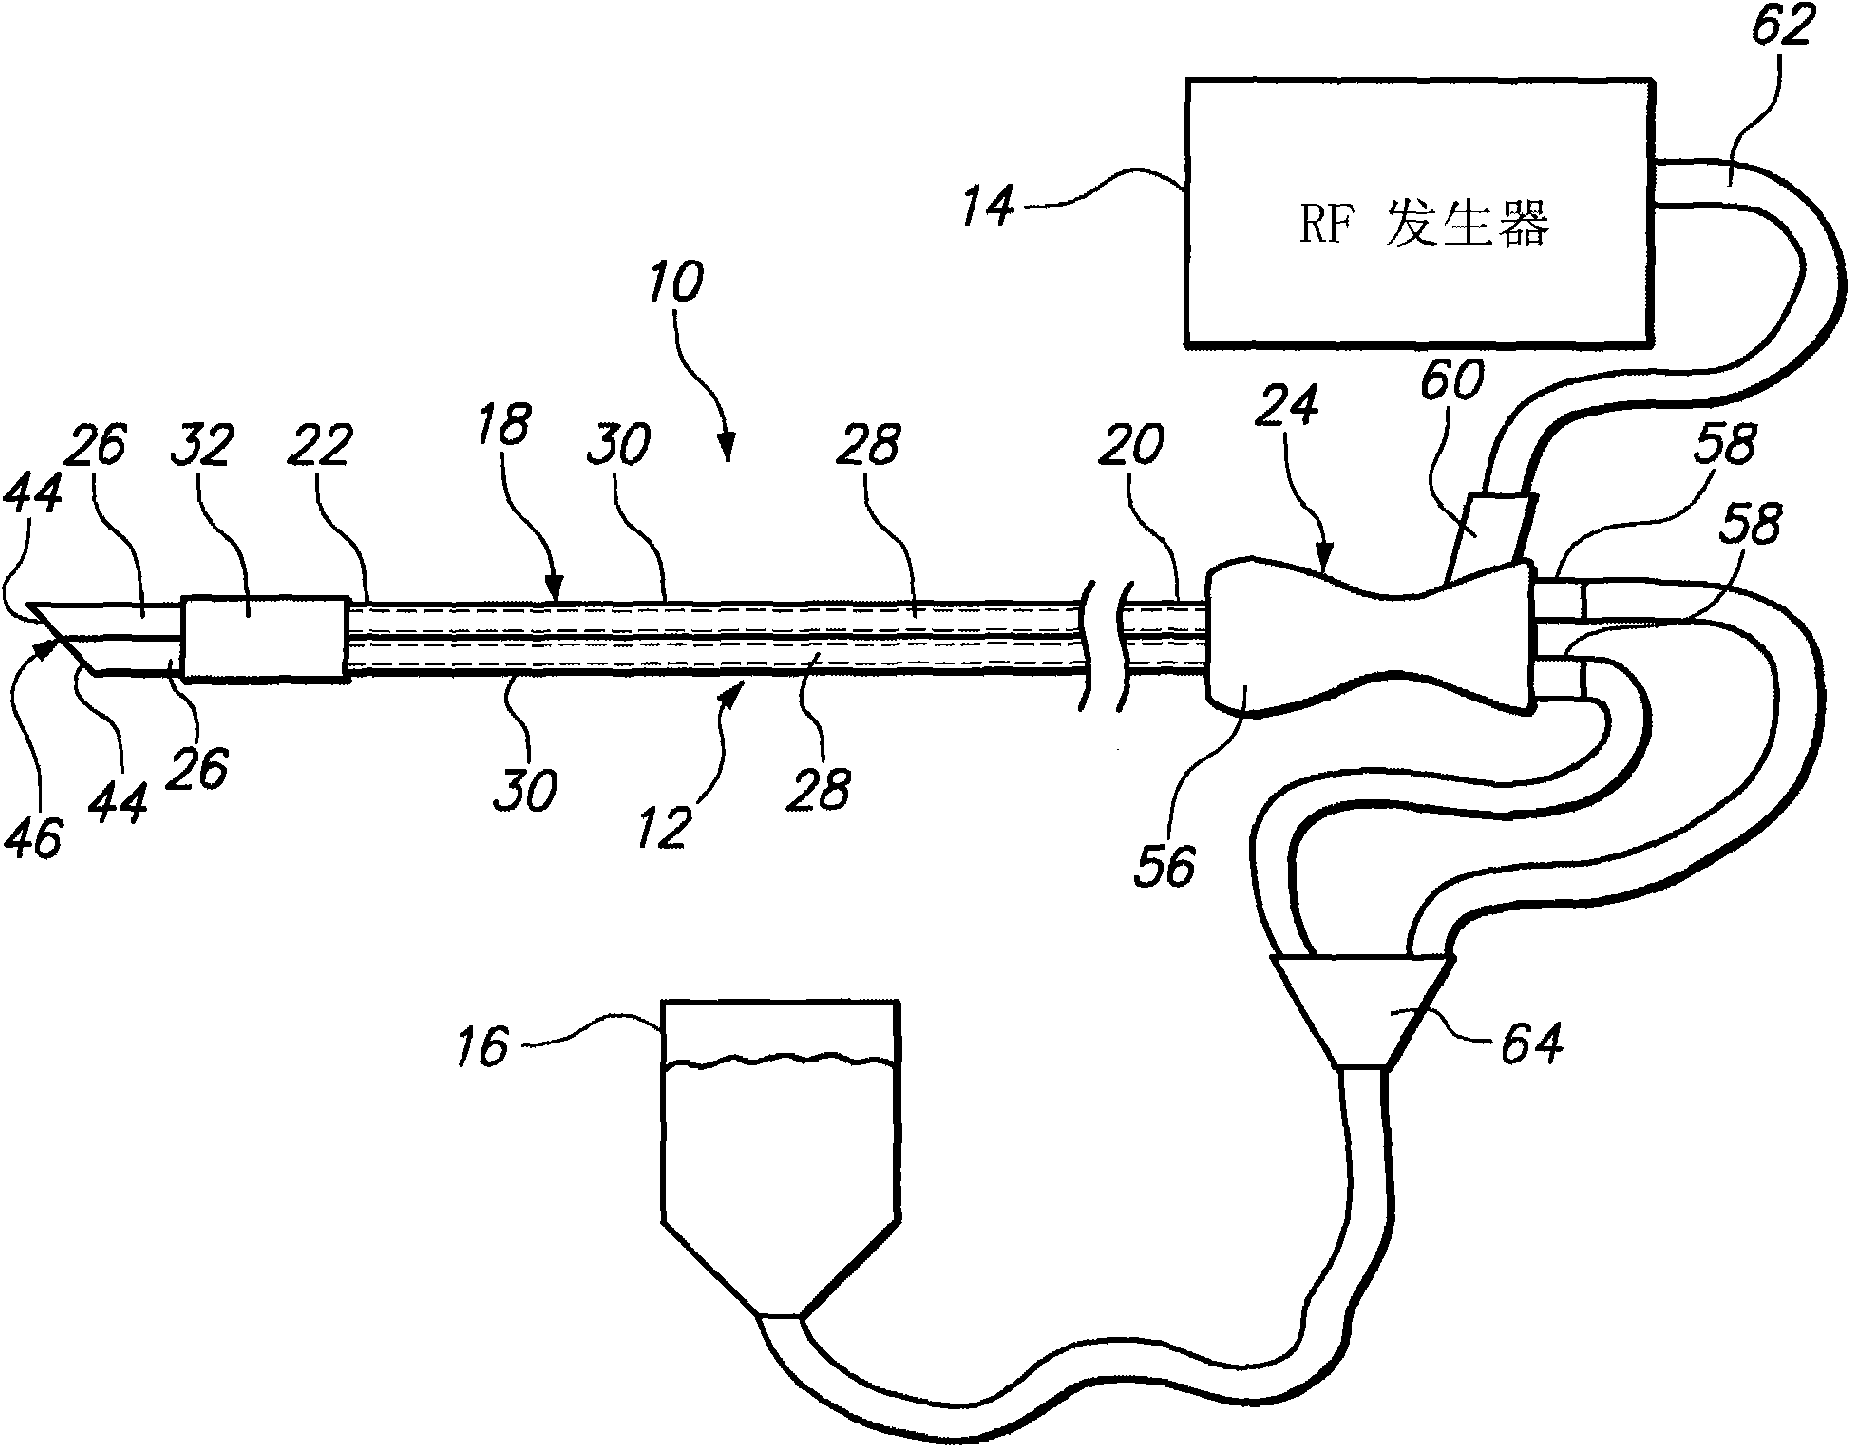 Bipolar ablation probe having porous electrodes for delivering electrically conductive fluid